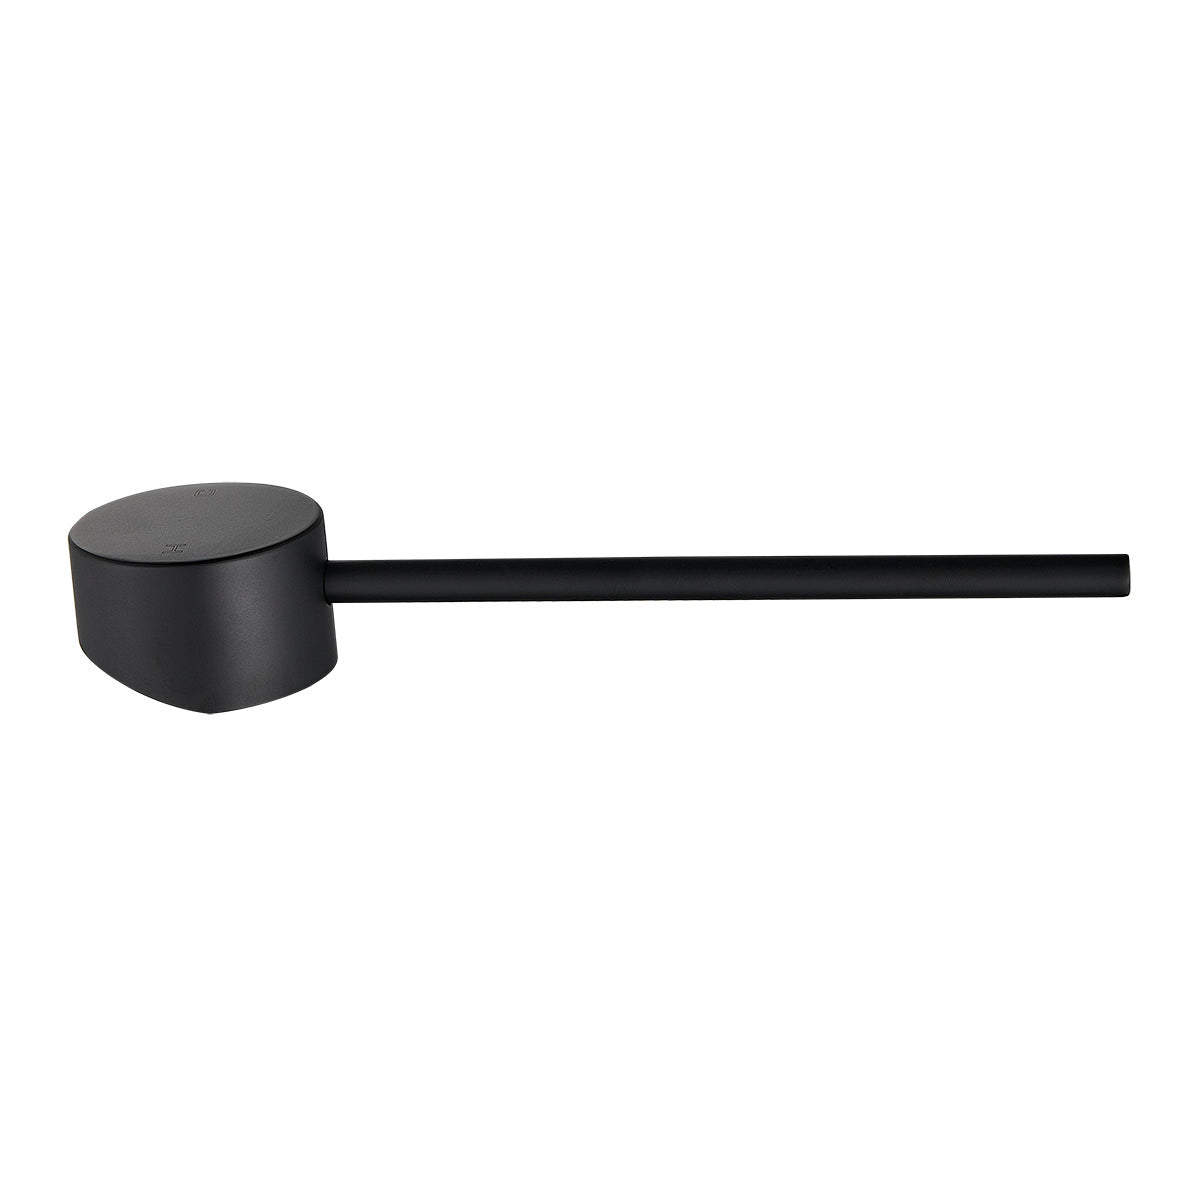 IDH5 (B) / Ideal Disable Handle (Black)